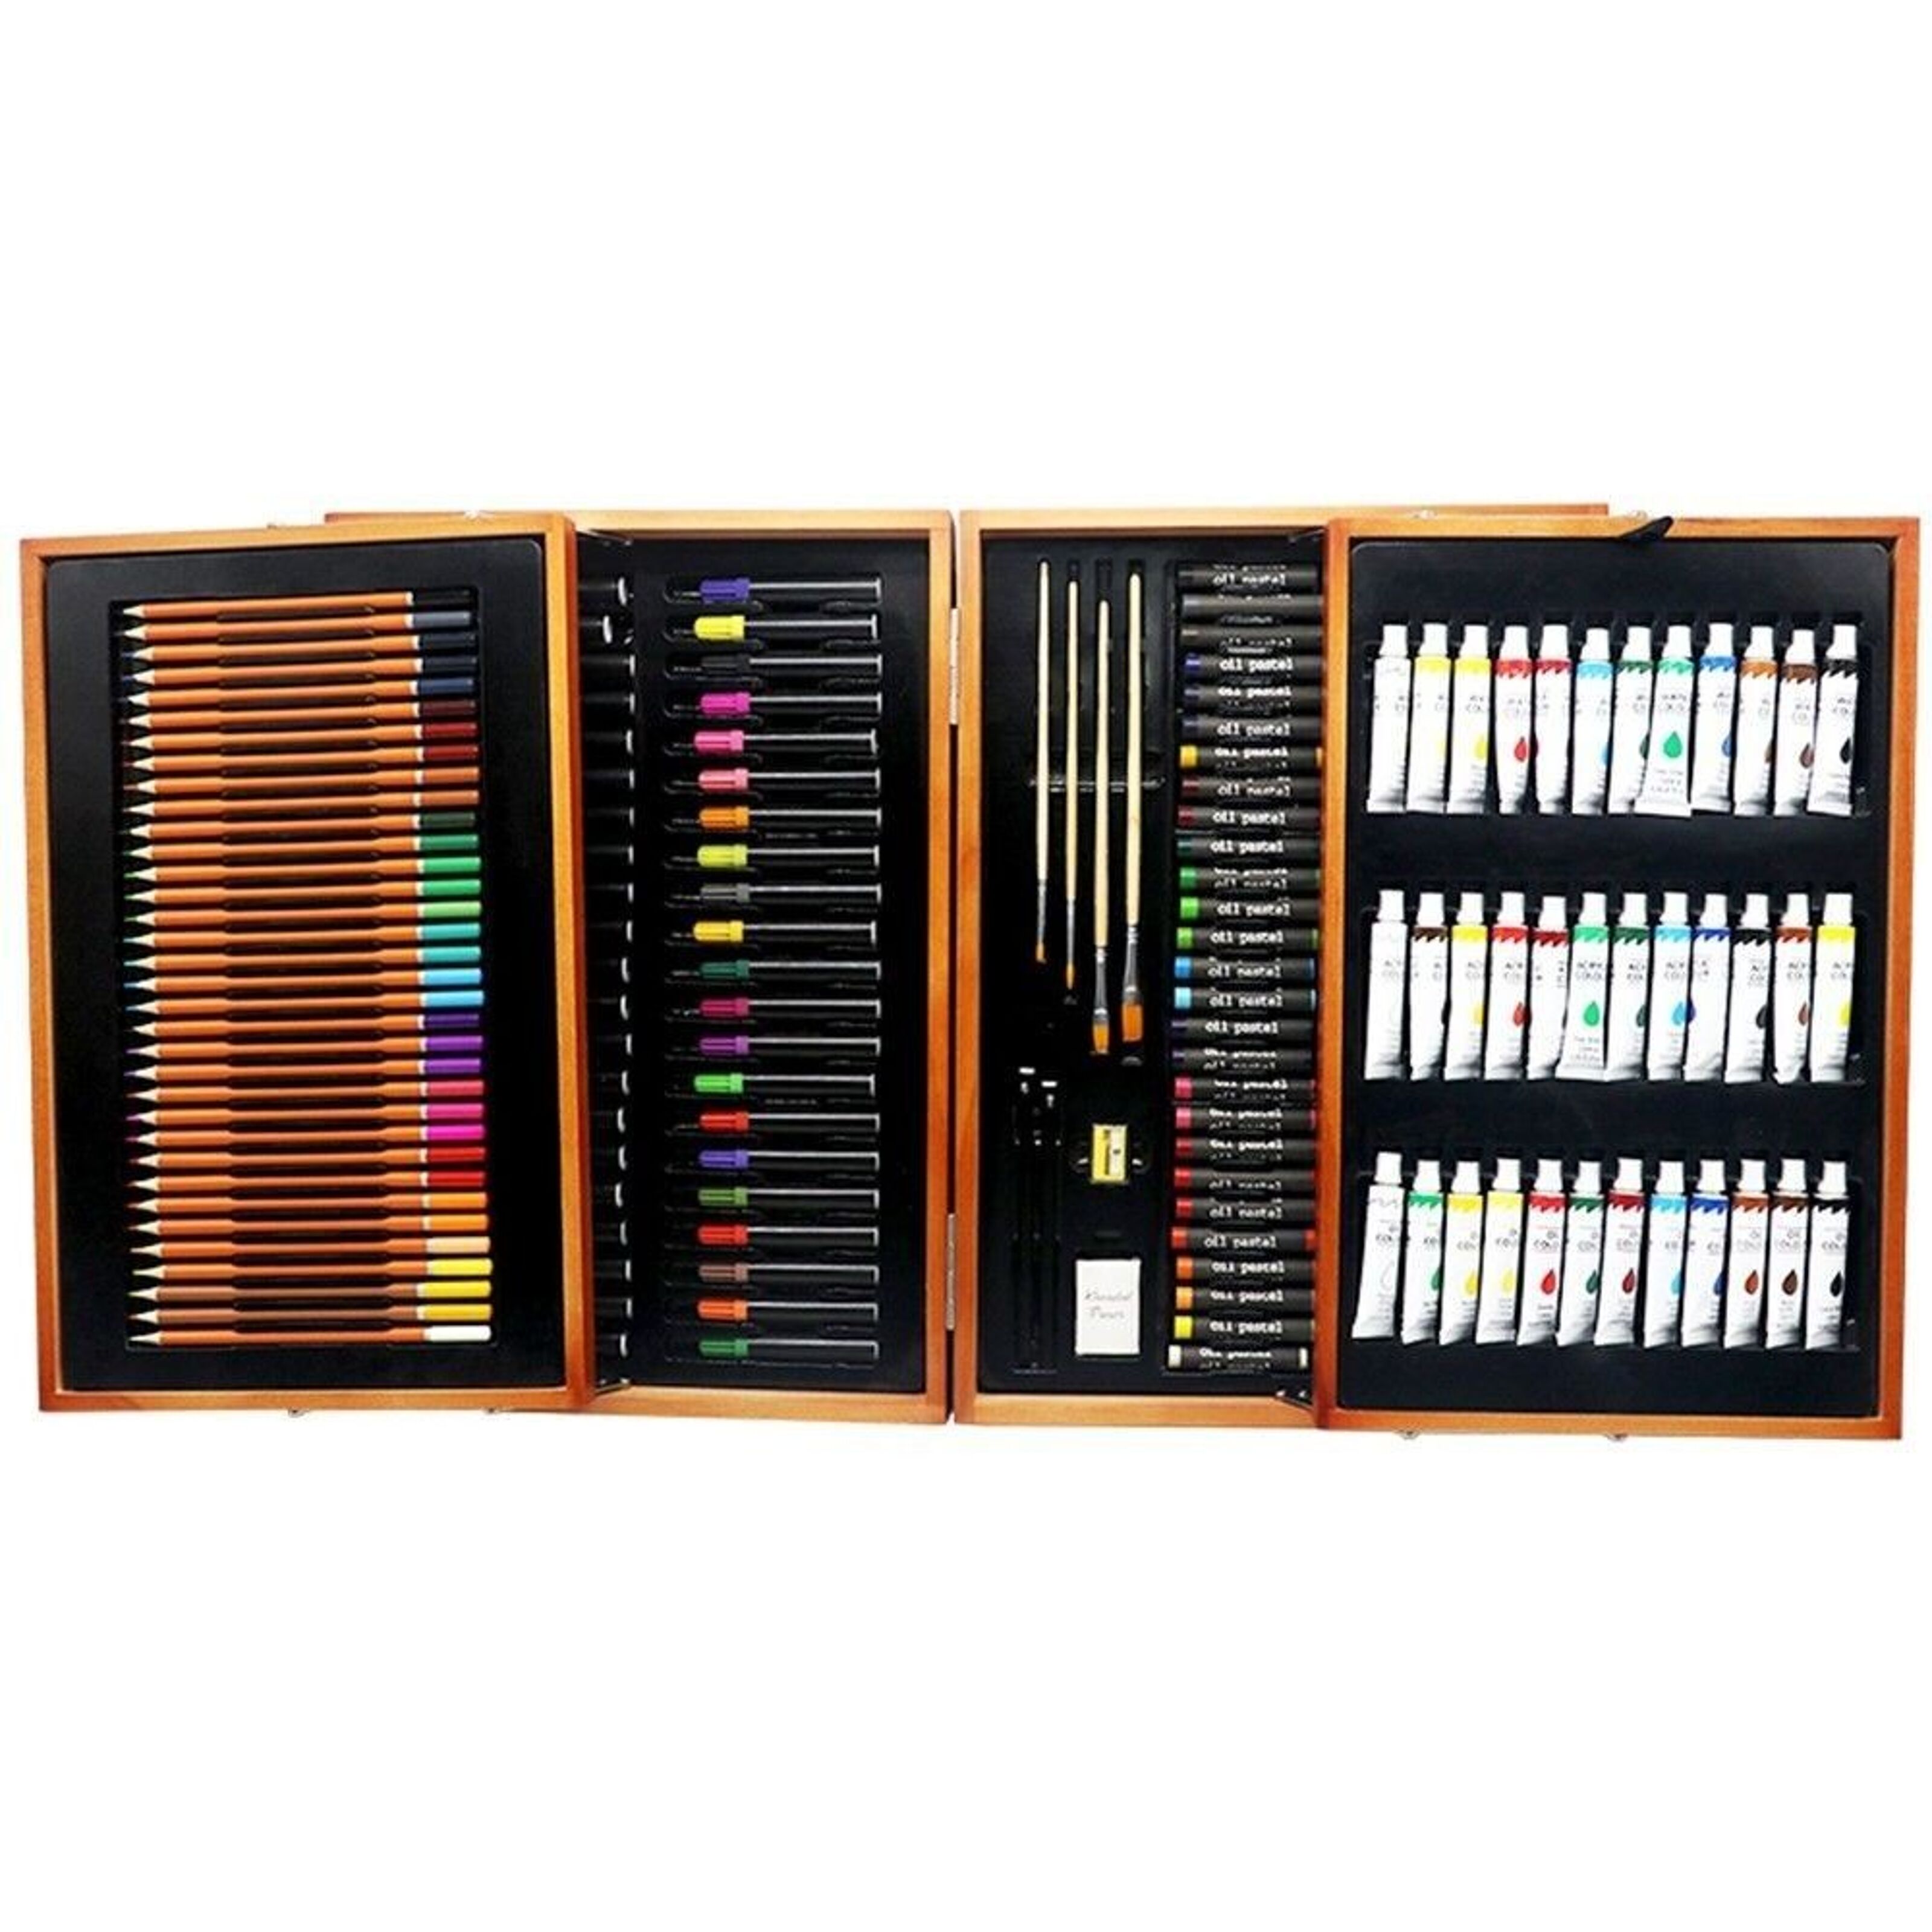 Buy wholesale Professional fine arts set 174 pieces in a deluxe wooden  case. Includes pencils, acrylic paint tubes, crayons, markers, brushes and  accessories. Brown Camouflage